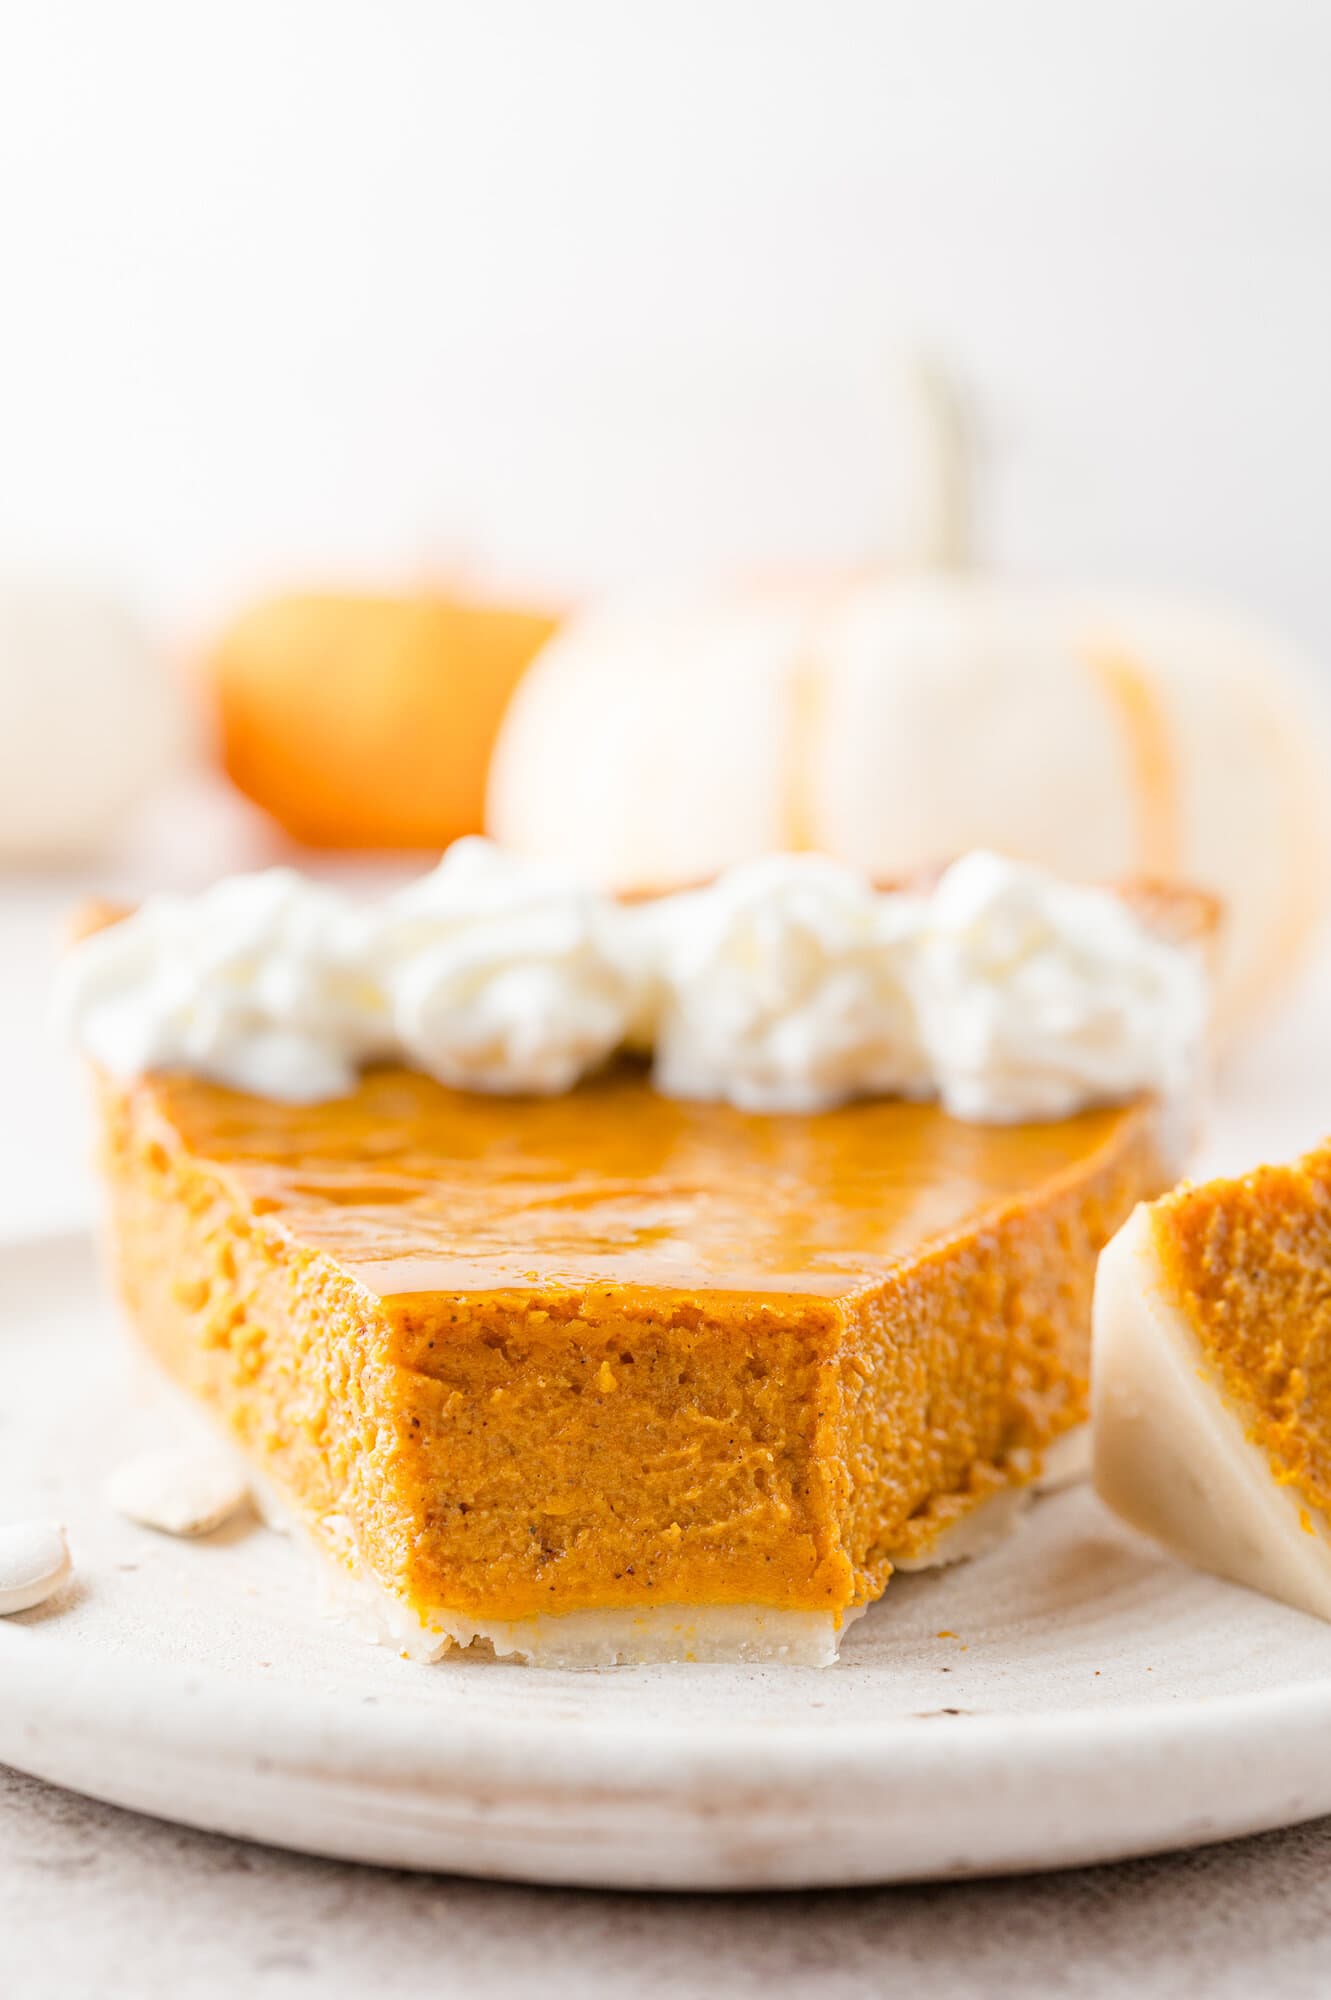 Slice of pumpkin pie with a bite taken out of it.